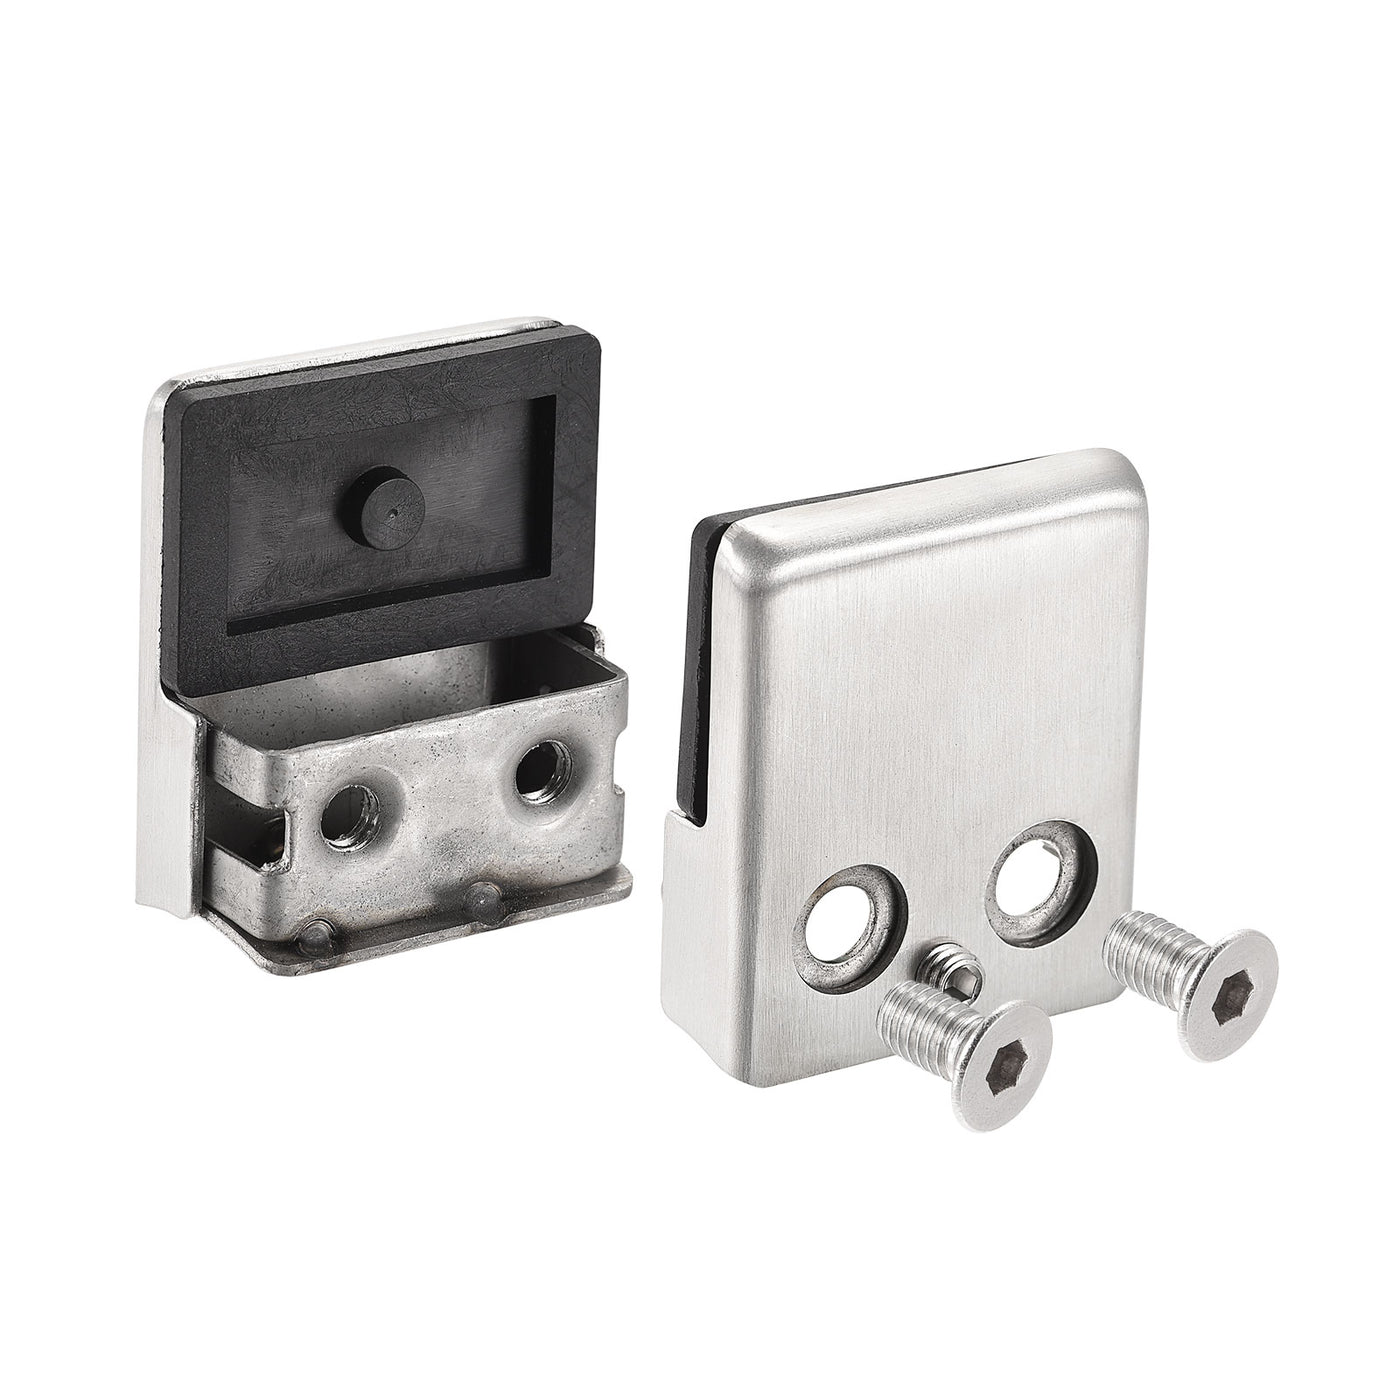 Uxcell Uxcell Glass Clamp 2pcs for 8-10mm Thick 48x43mm 304 Stainless Steel Square Glass Clip